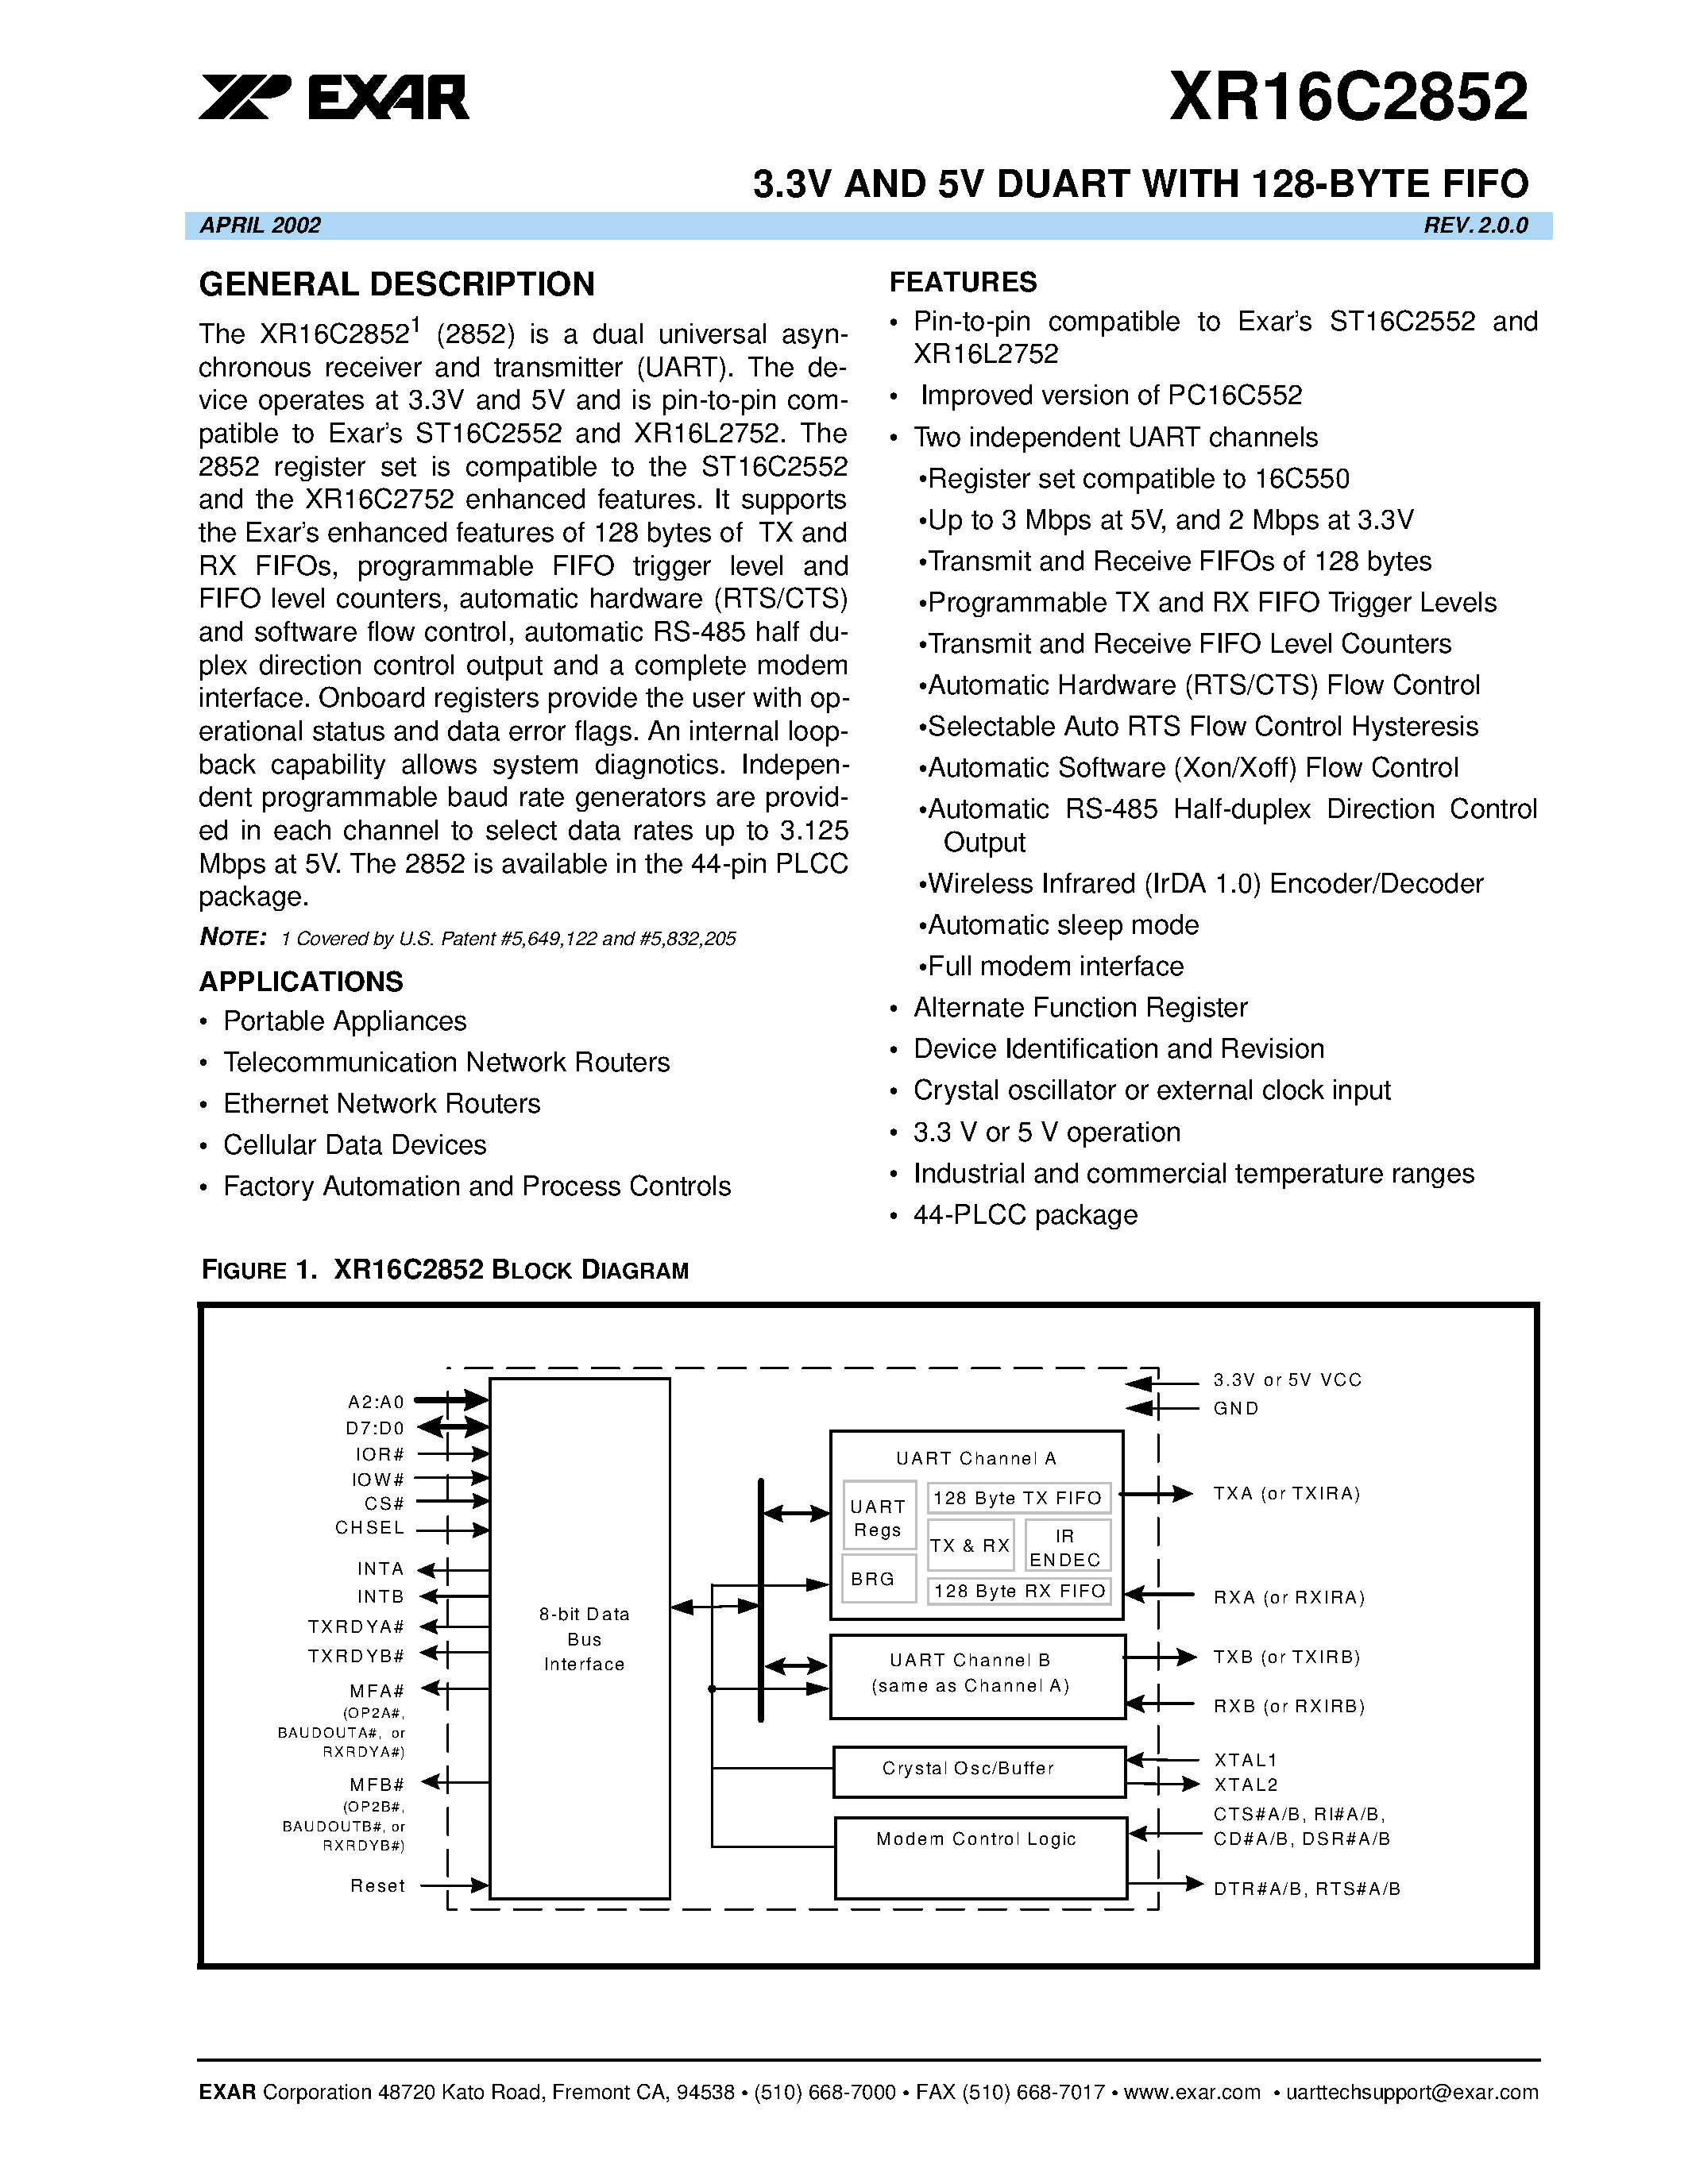 Datasheet XR16C2852 - 3.3V AND 5V DUART WITH 128-BYTE FIFO page 1